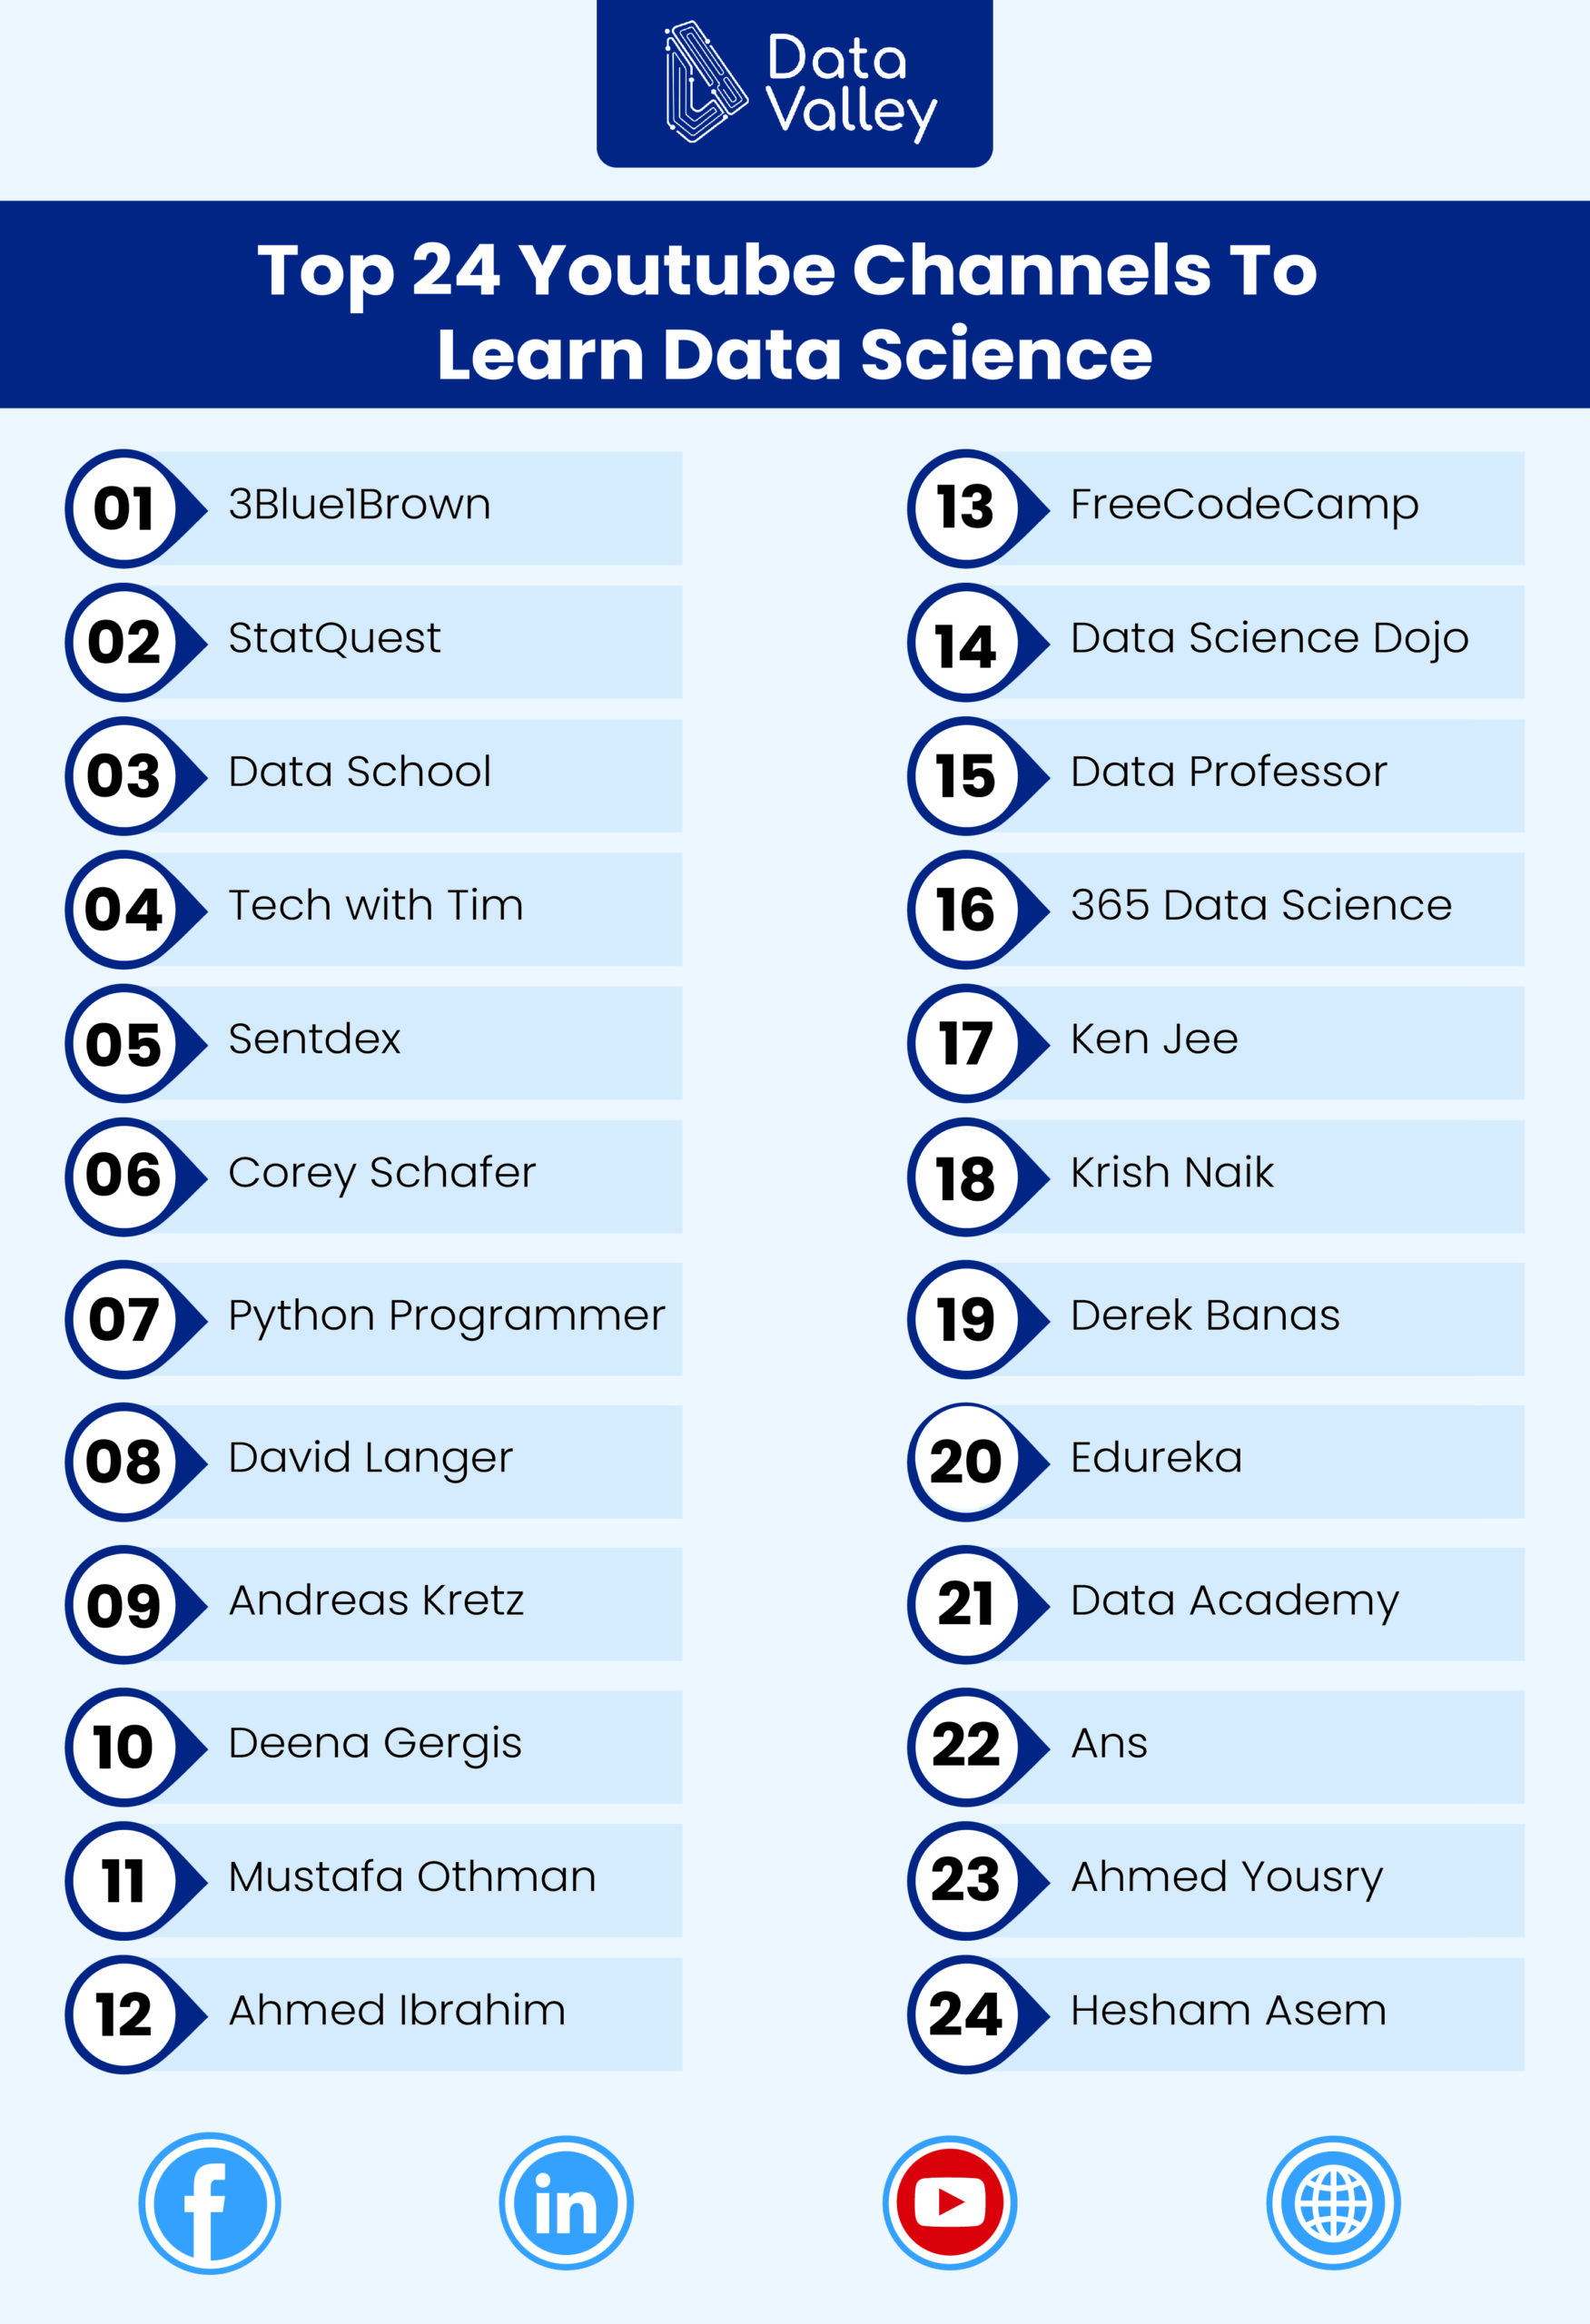 Top 24 Youtube Channels to Learn Data Science